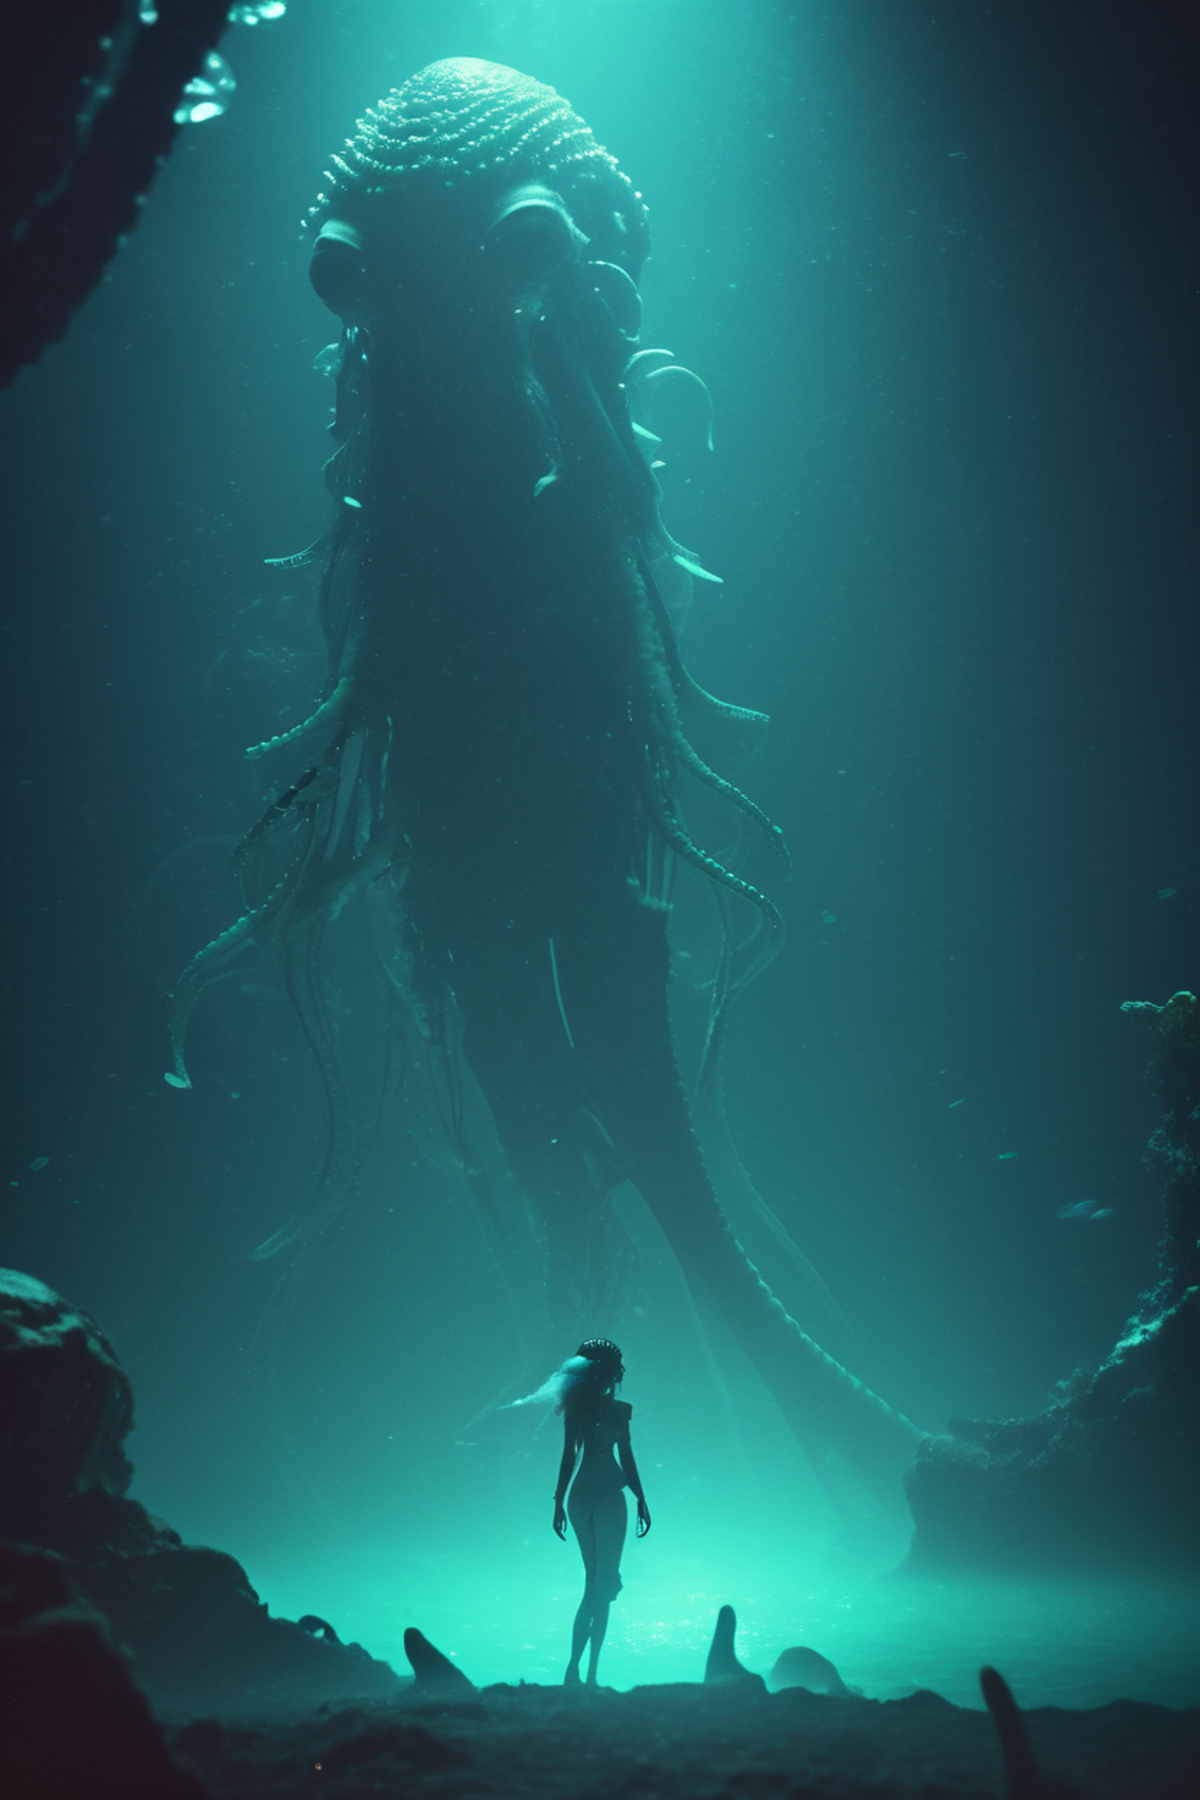 A woman standing next to a giant sea creature in a blue underwater environment.